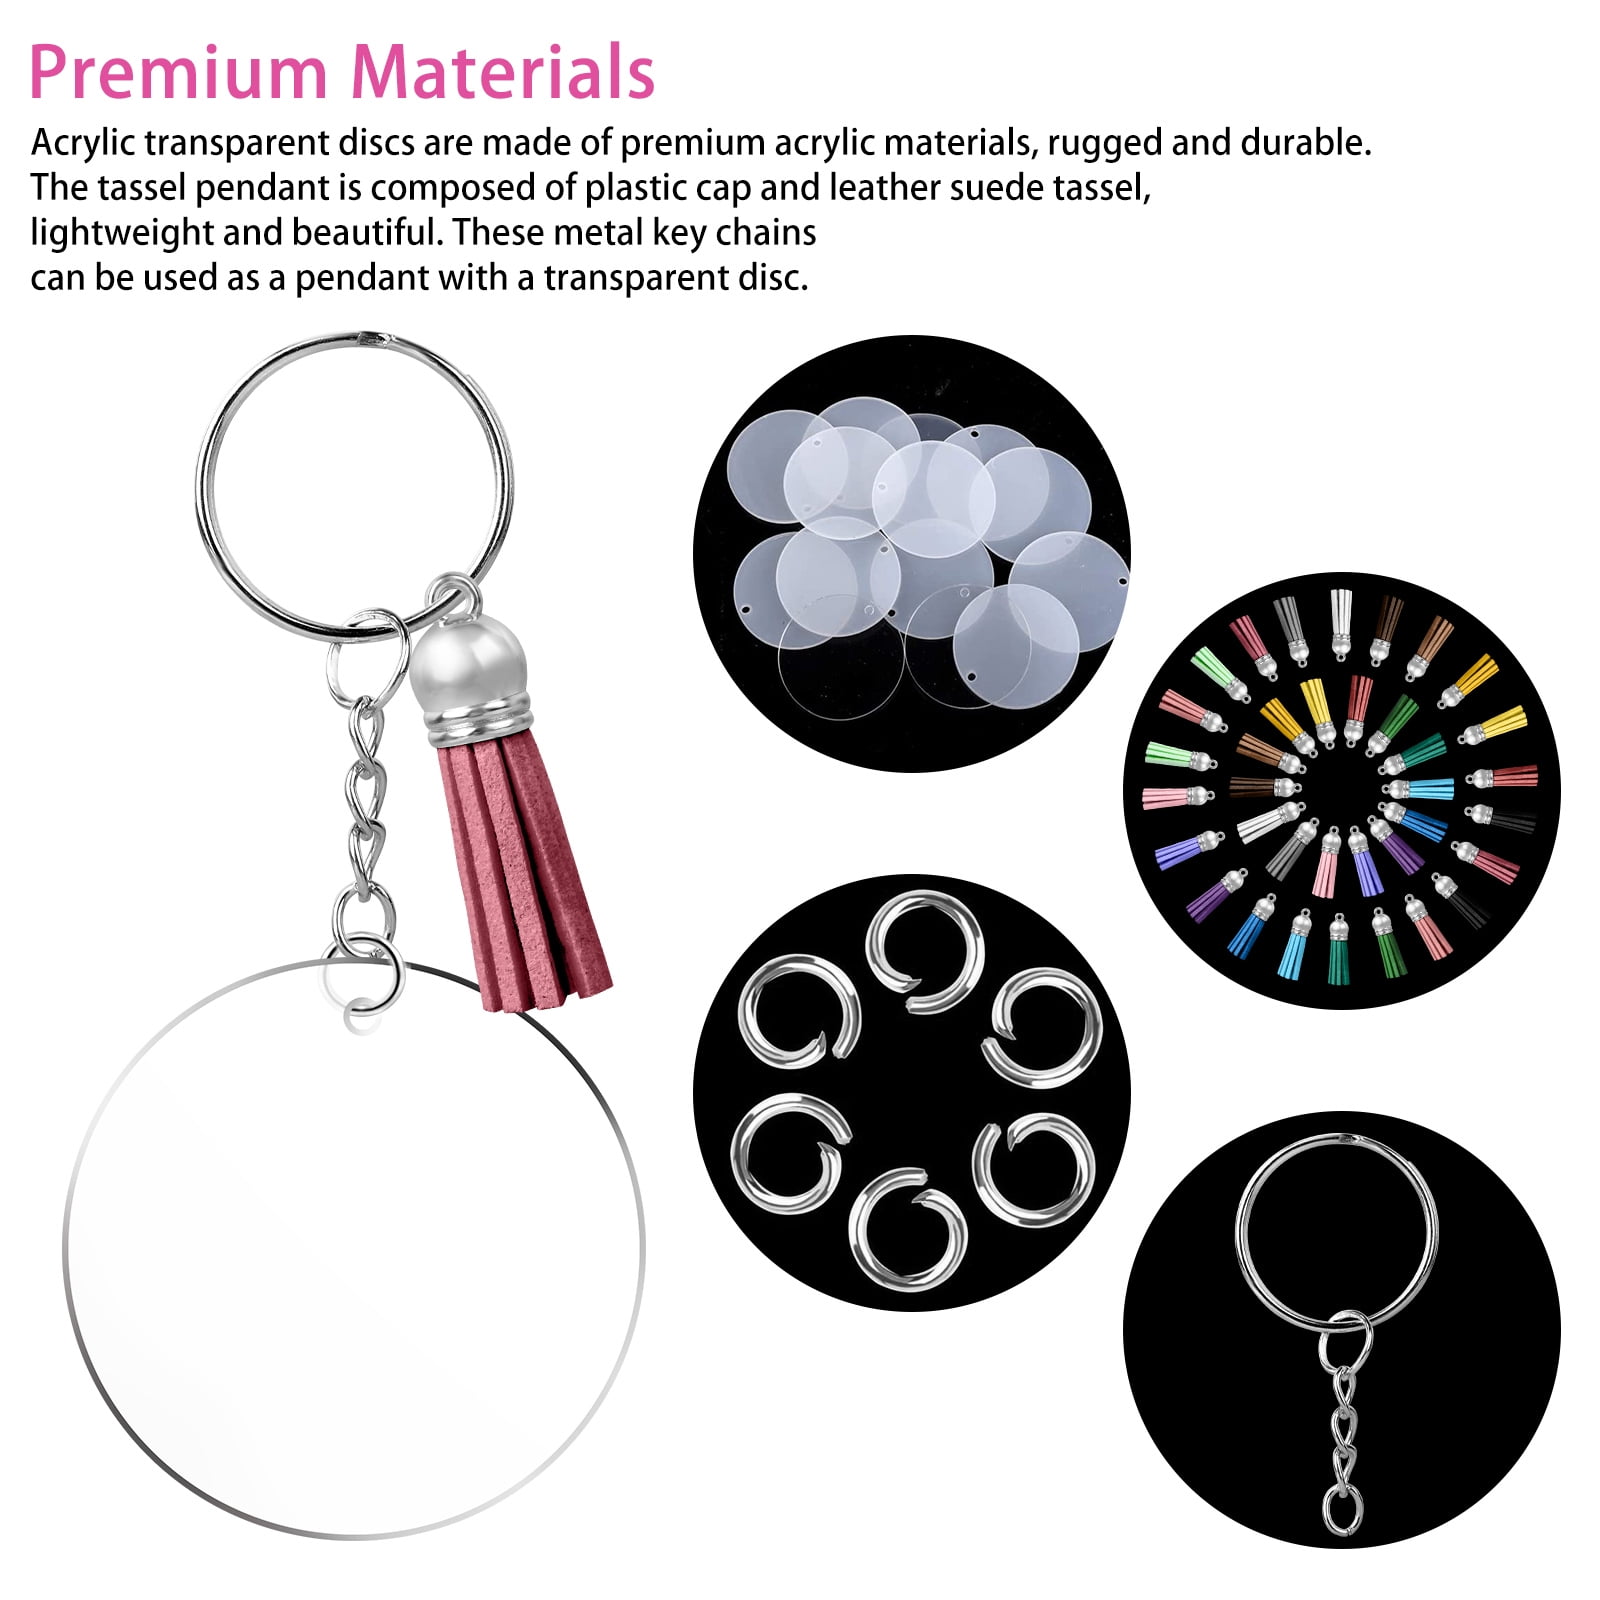 EUBUY Keychain Clear Blanks Set for Vinyl DIY Keychain Crafting Including  26pcs Round Discs 26pcs Keychain Tassels 26pcs Key Chain Rings 26 Key Clasp  Hooks Gold 